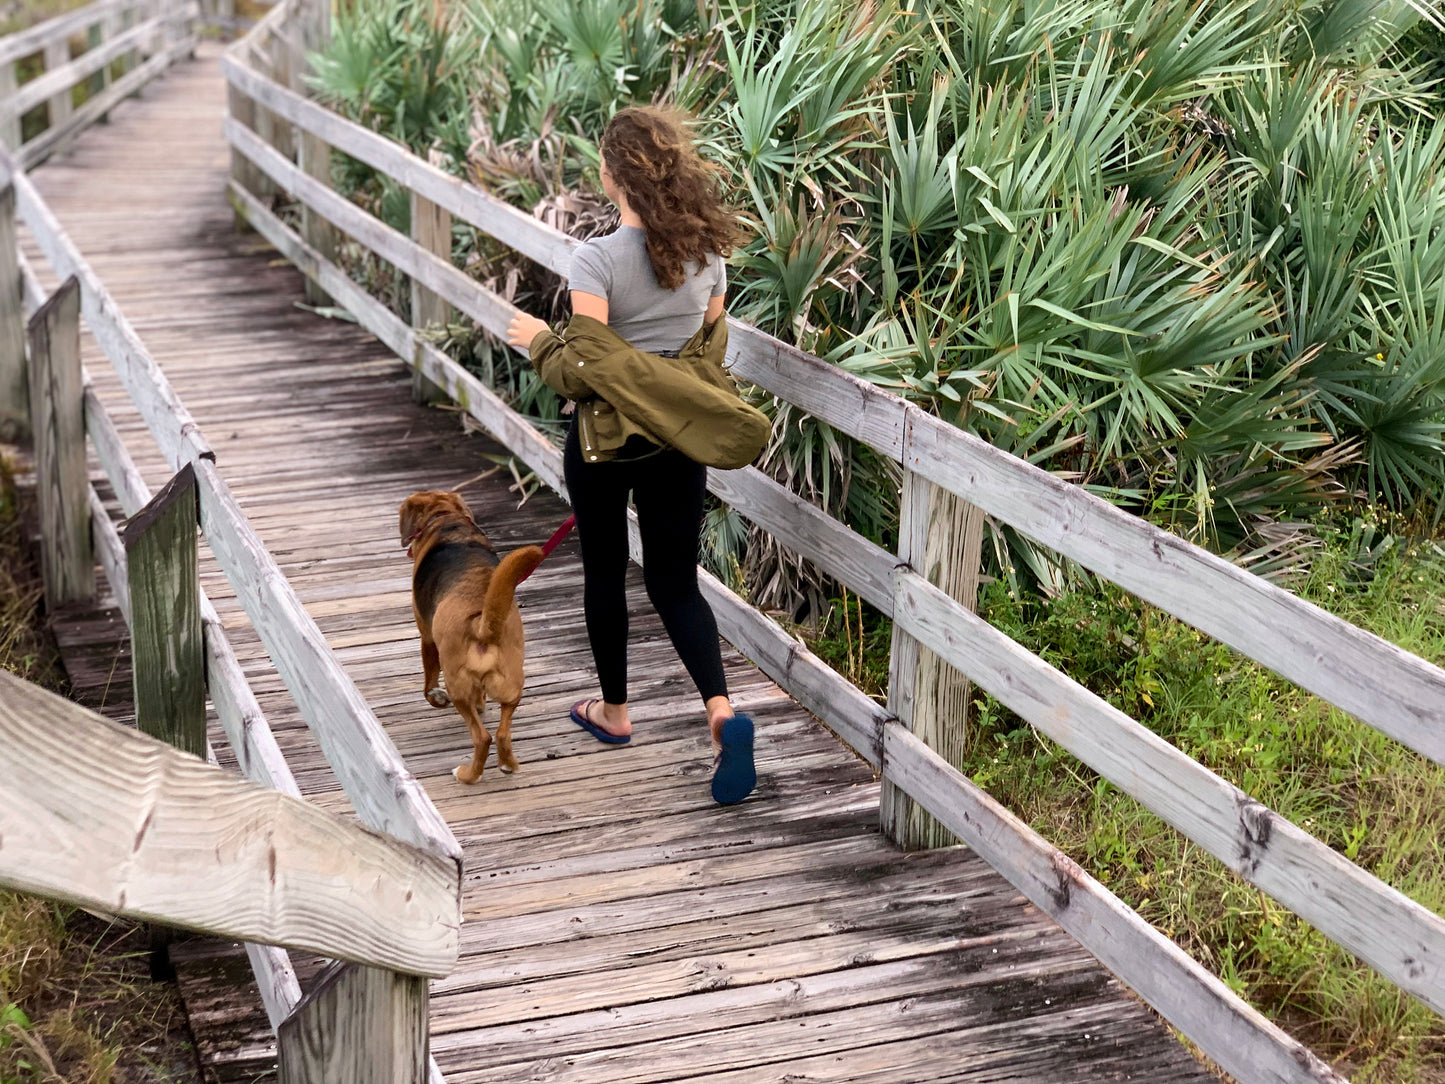 A teenage girl walks her dog along the wooden boardwalk at Jonathan Dickinson State Park in Florida. She is facing away from the camera and wearing flip-flops and a light, olive green windbreaker.